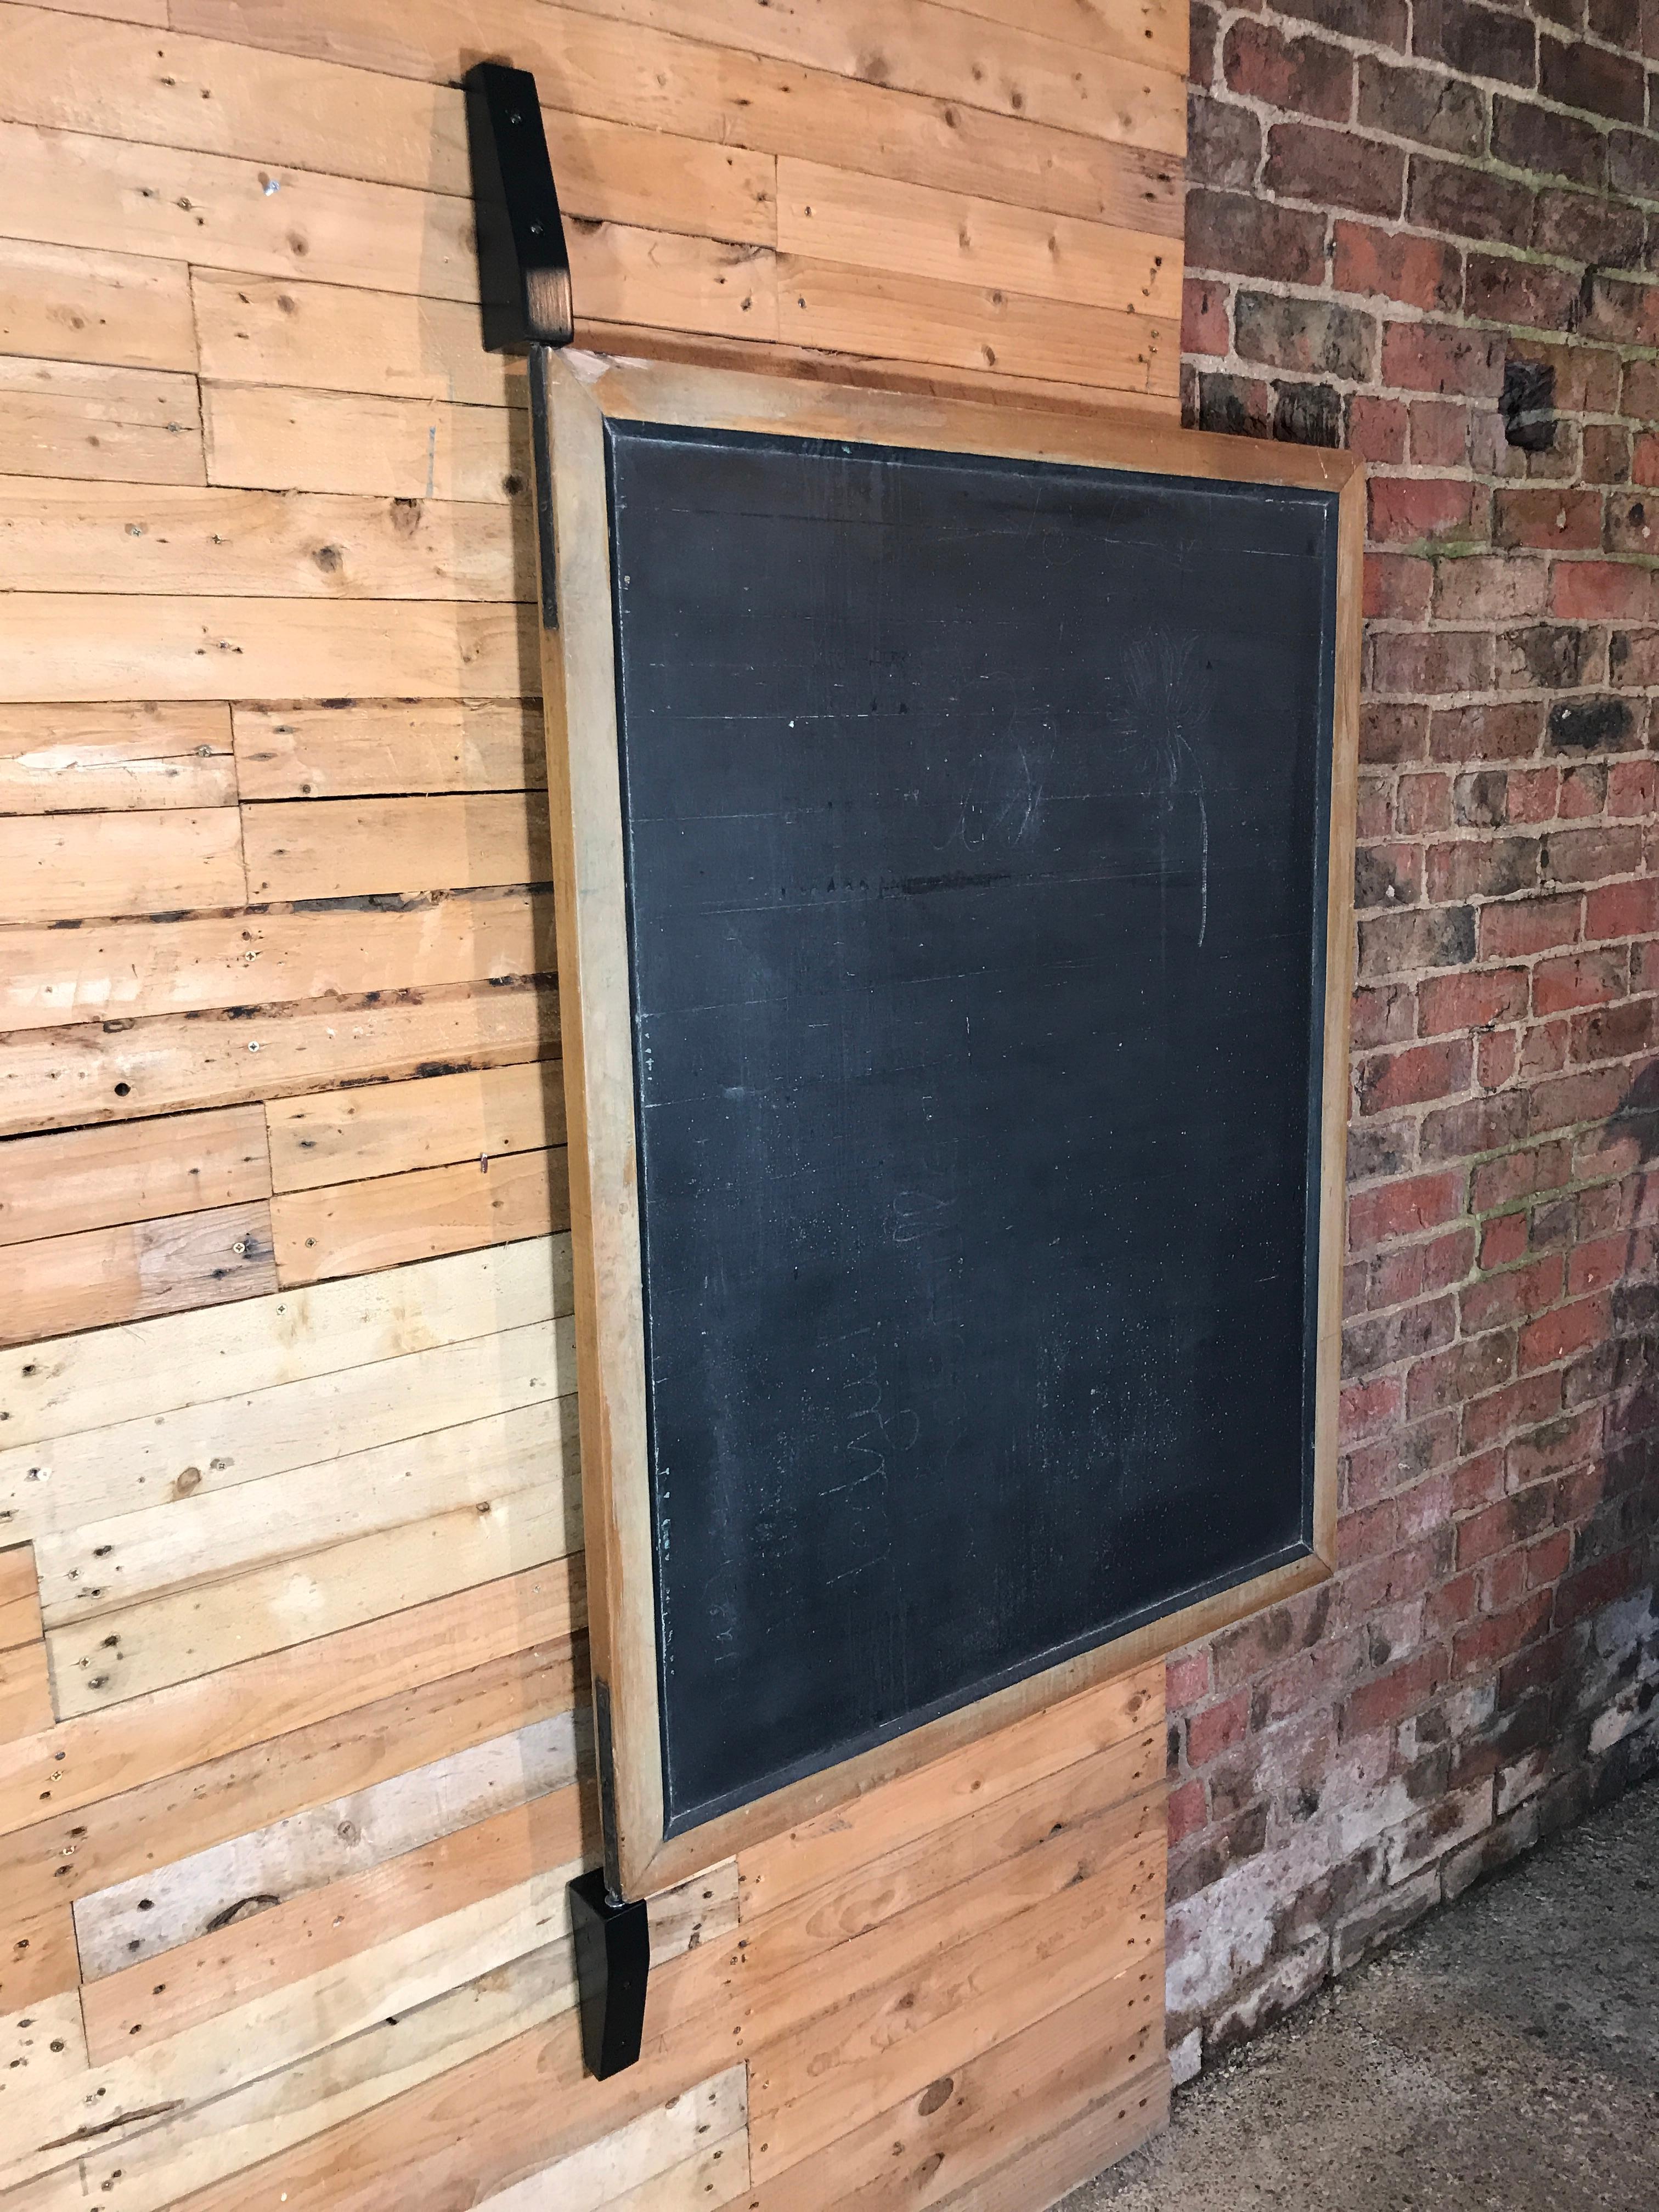 Industrial blackboard with wooden wall attachment, board swings around so ideal for restaurants which have a lunch menu on one side and dinner offer on the other side.

Measures: Total height 170 cm, board 130 cm, depth 11cm, width 103 cm.